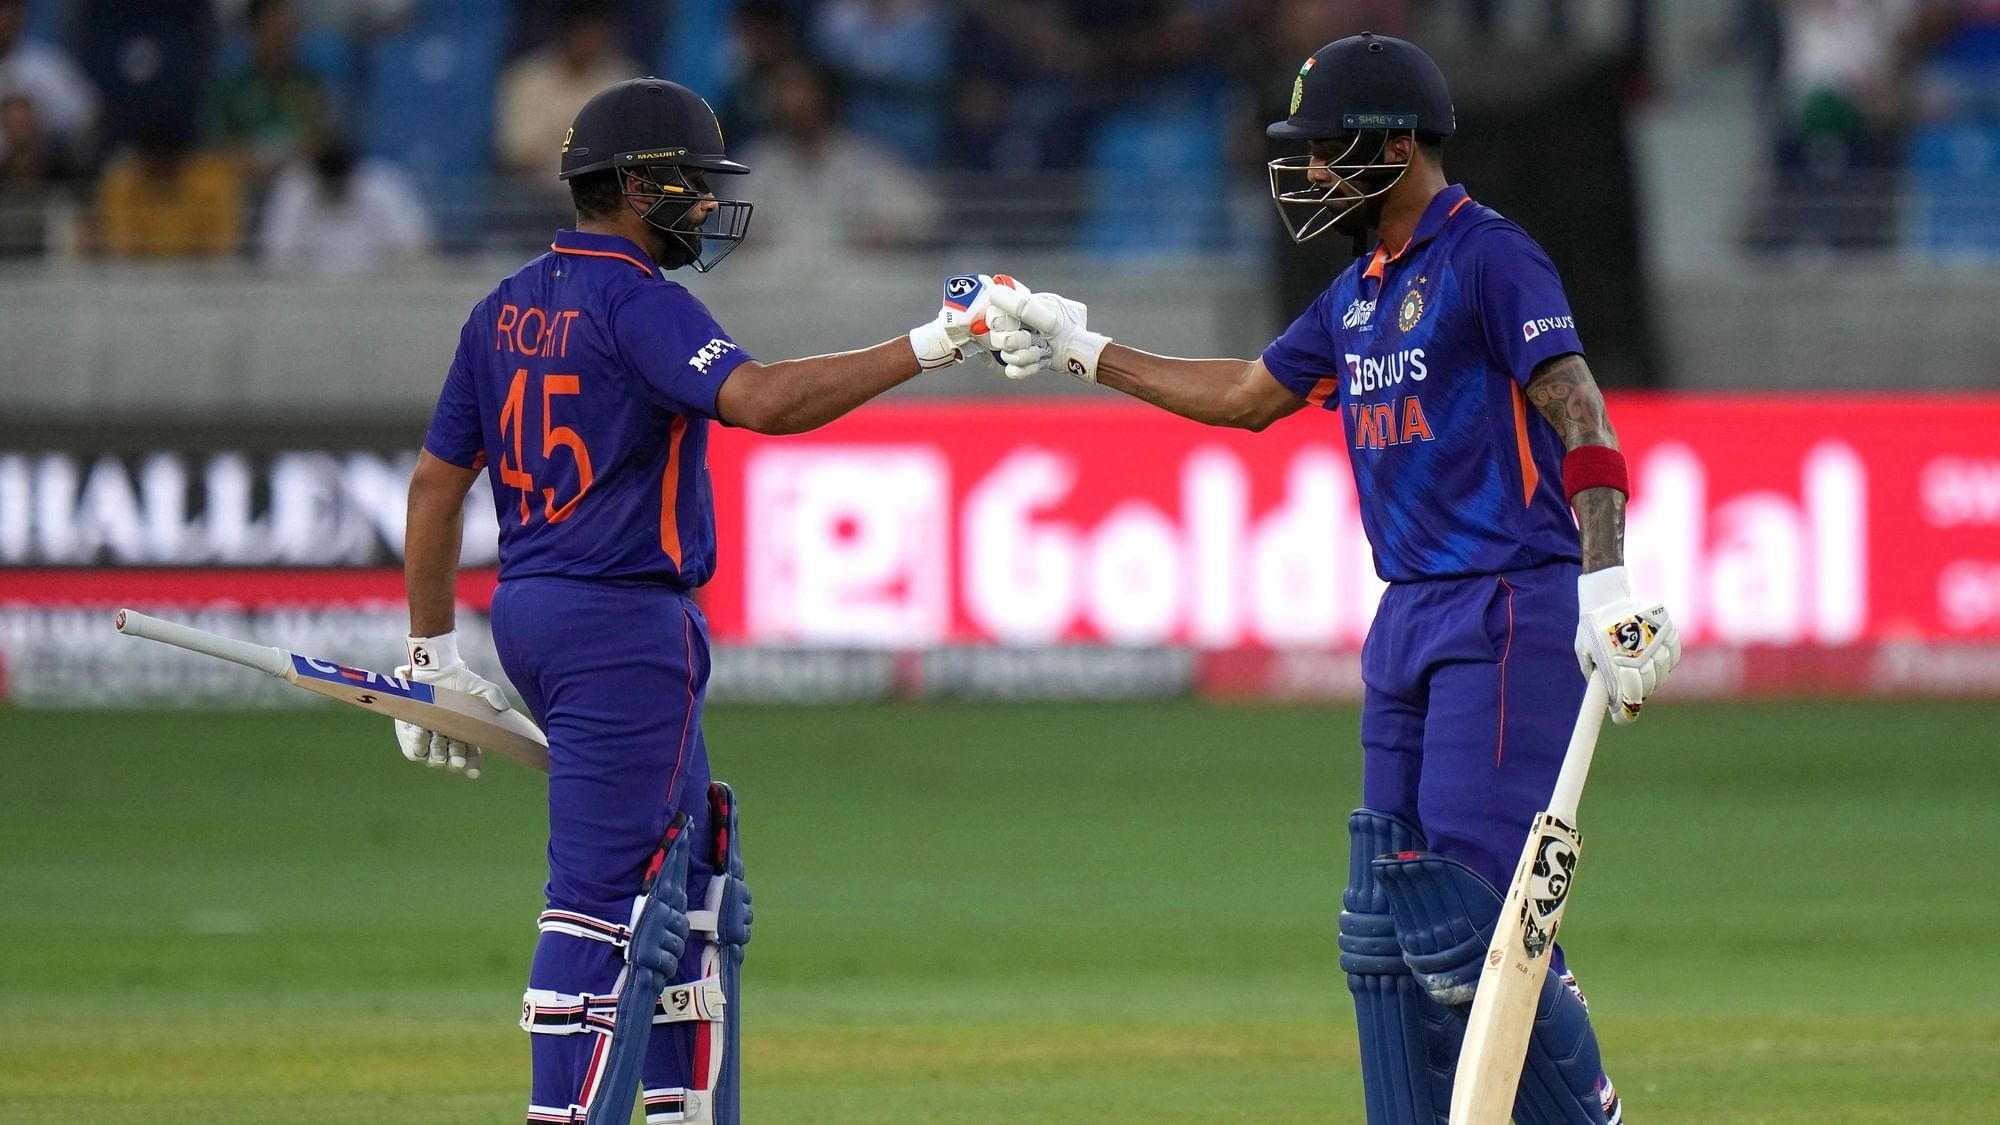 India vs Sri Lanka Asia Cup 2023 Today Know Where and When to Watch the Live Streaming in India, IND vs SL Venue, Latest Updates Here